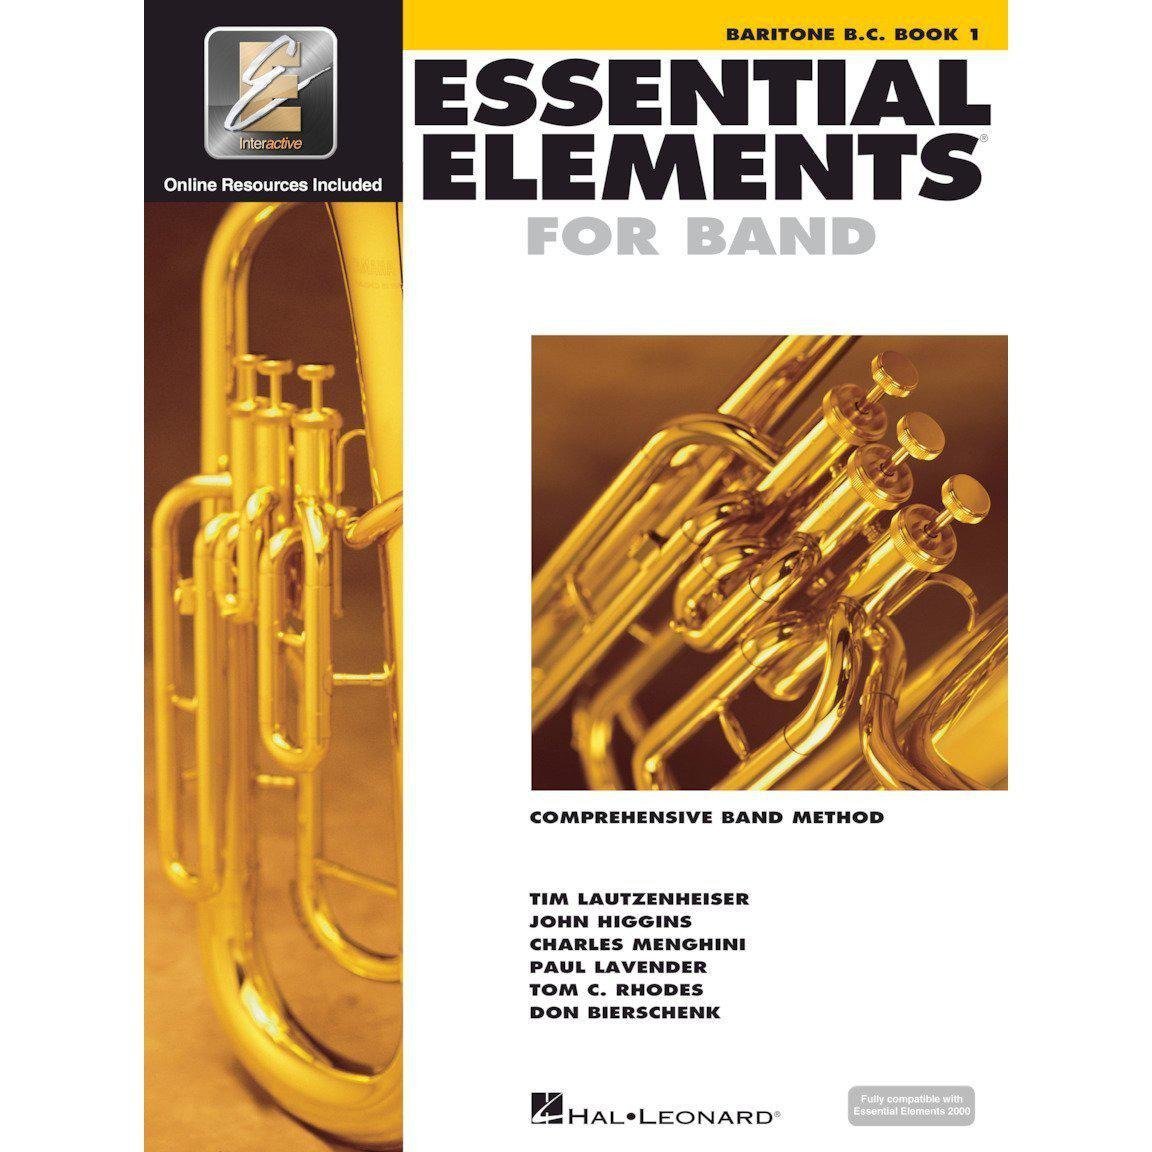 Essential Elements for Band Book 1-Baritone B.C.-Andy's Music